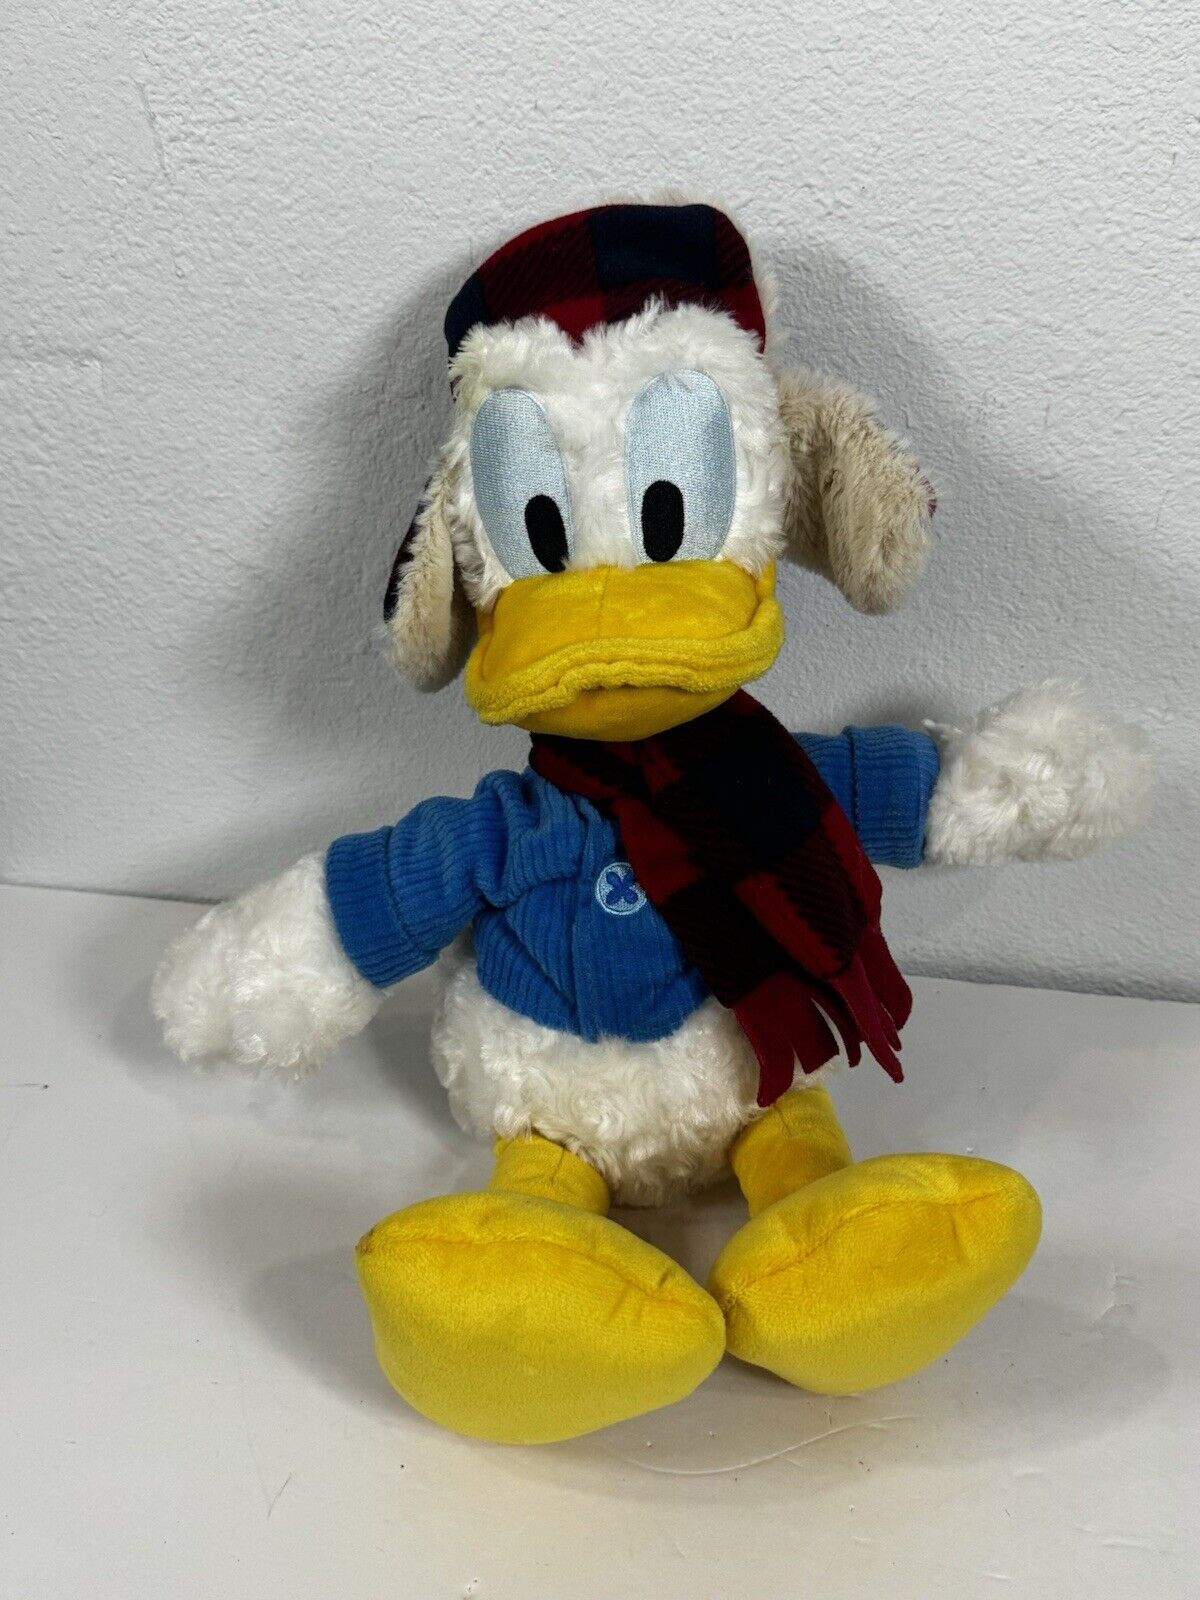 DISNEY DONALD DUCK WINTER WISHES HOLIDAY PLUSH TOY Disney Tags In Pics